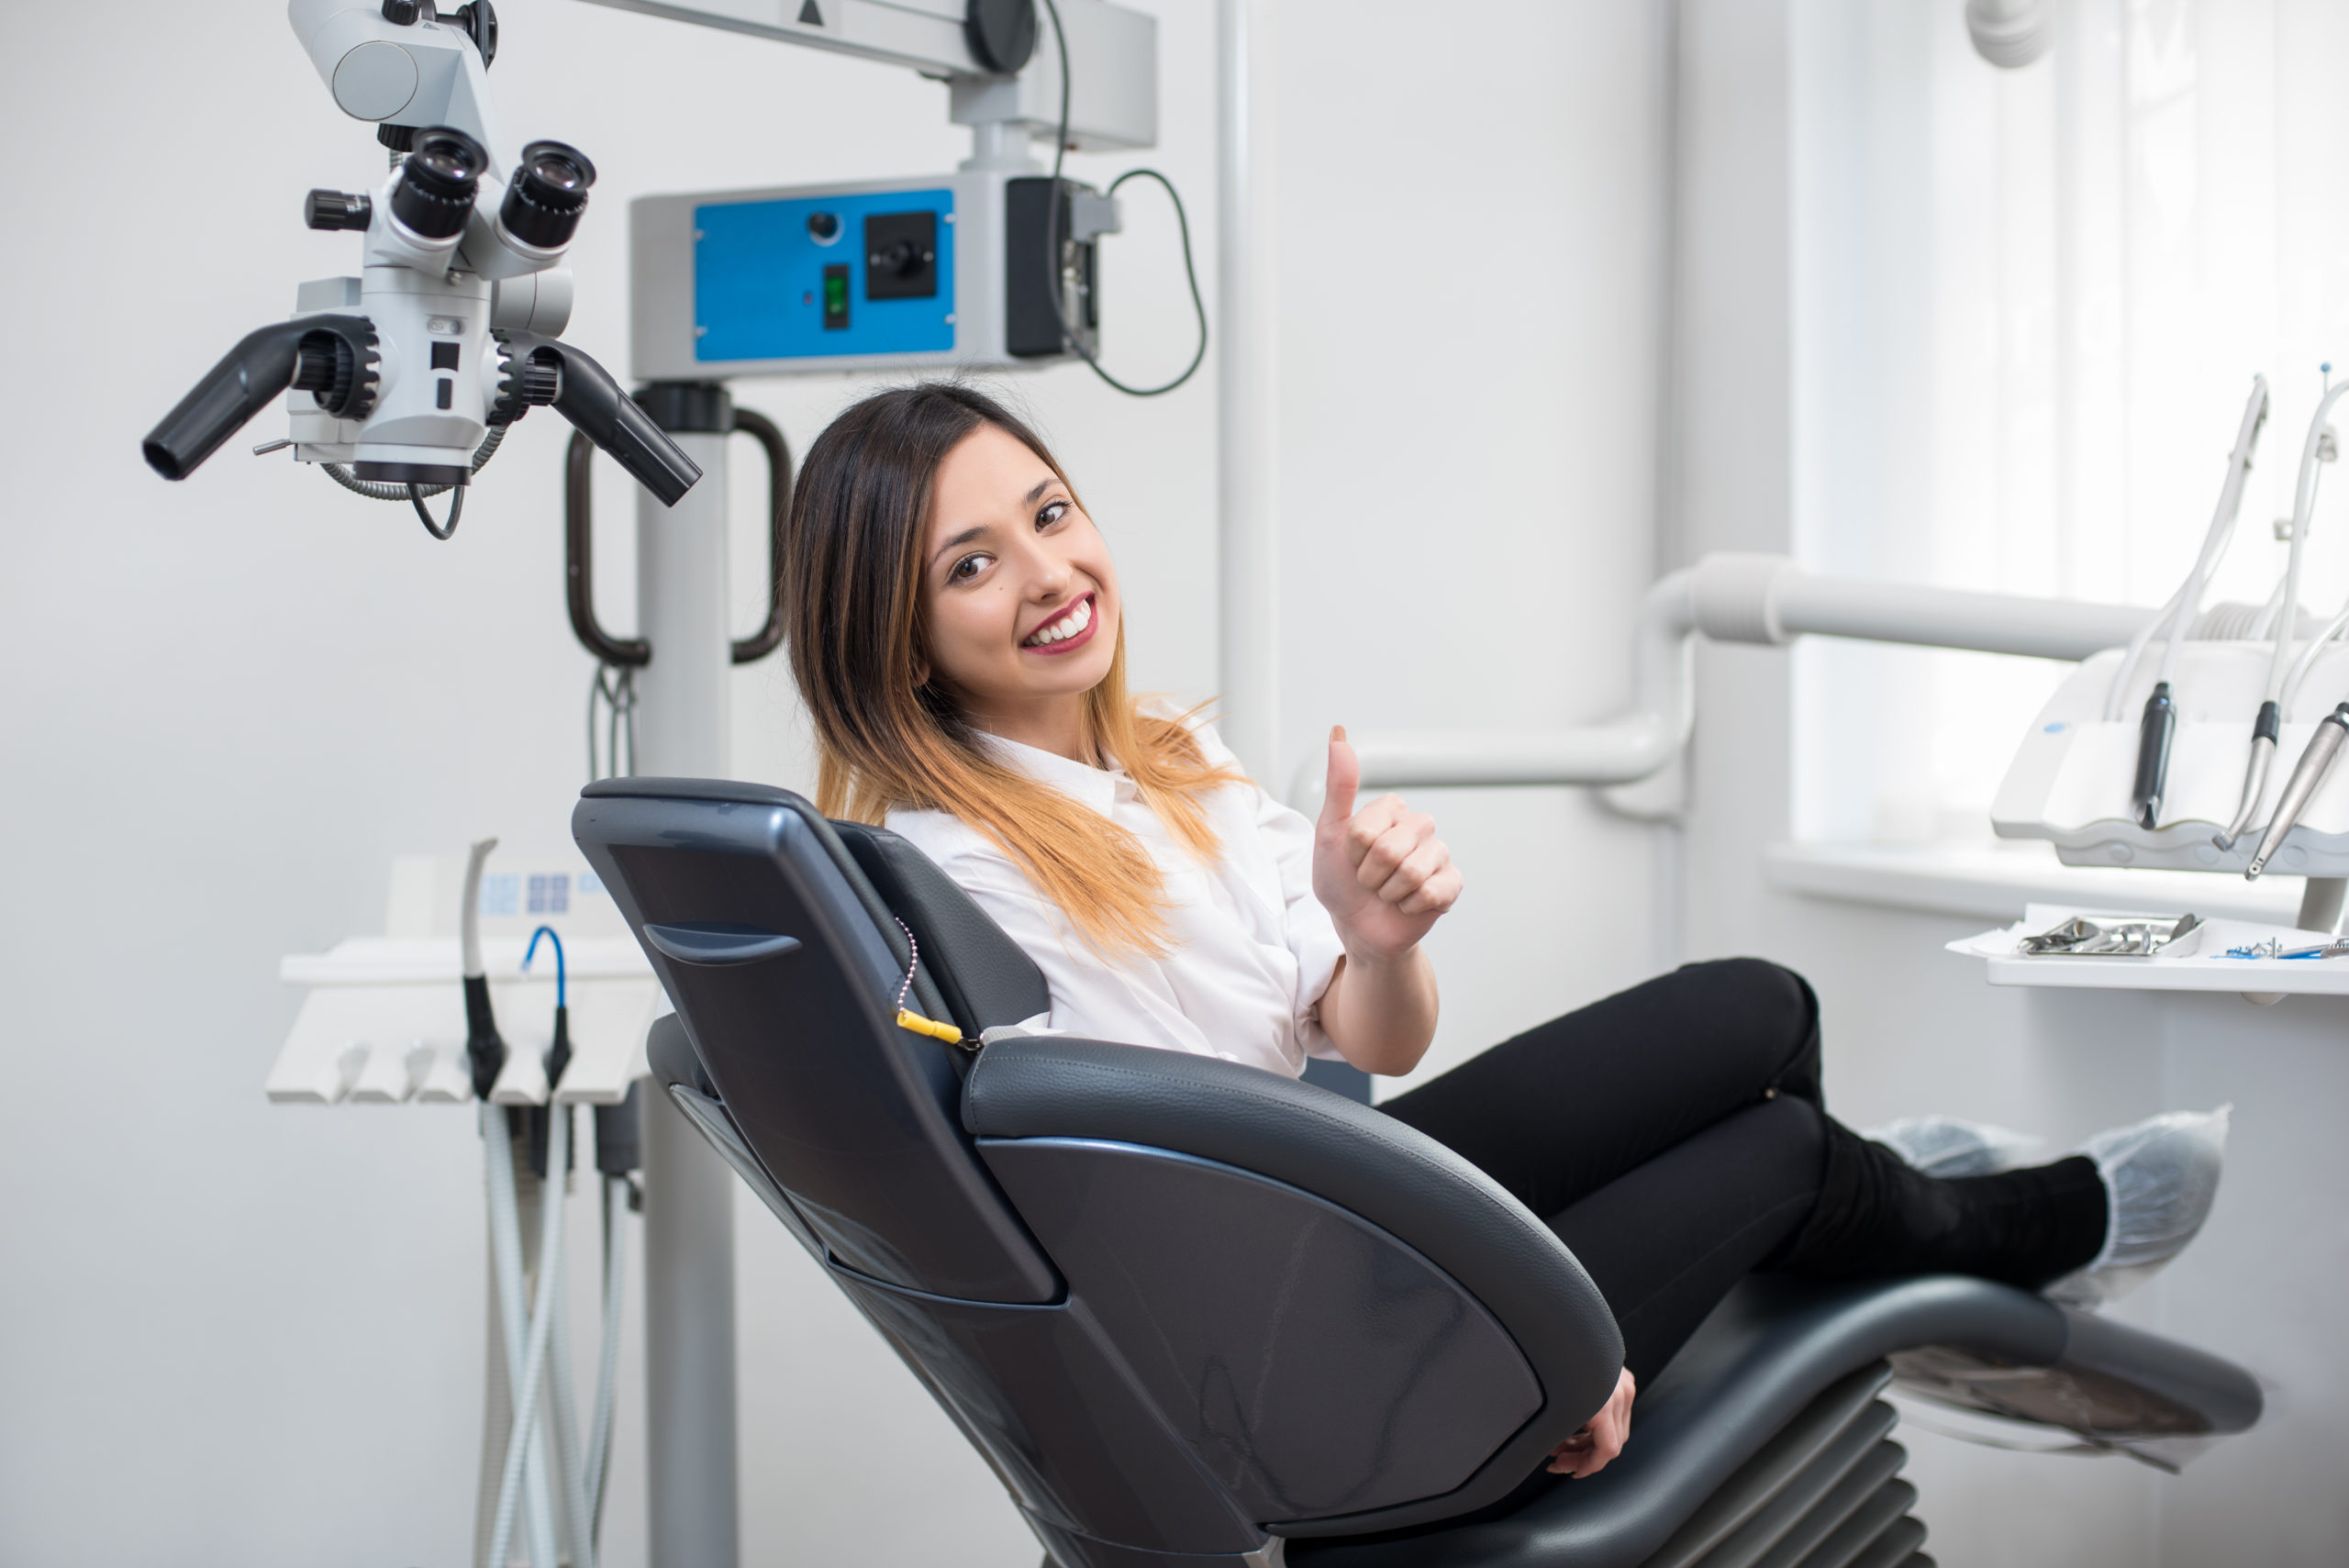 For many patients, the idea of allowing a dentist to work on their teeth can be very troubling, and may even discourage a person from seeking dental treatment altogether.